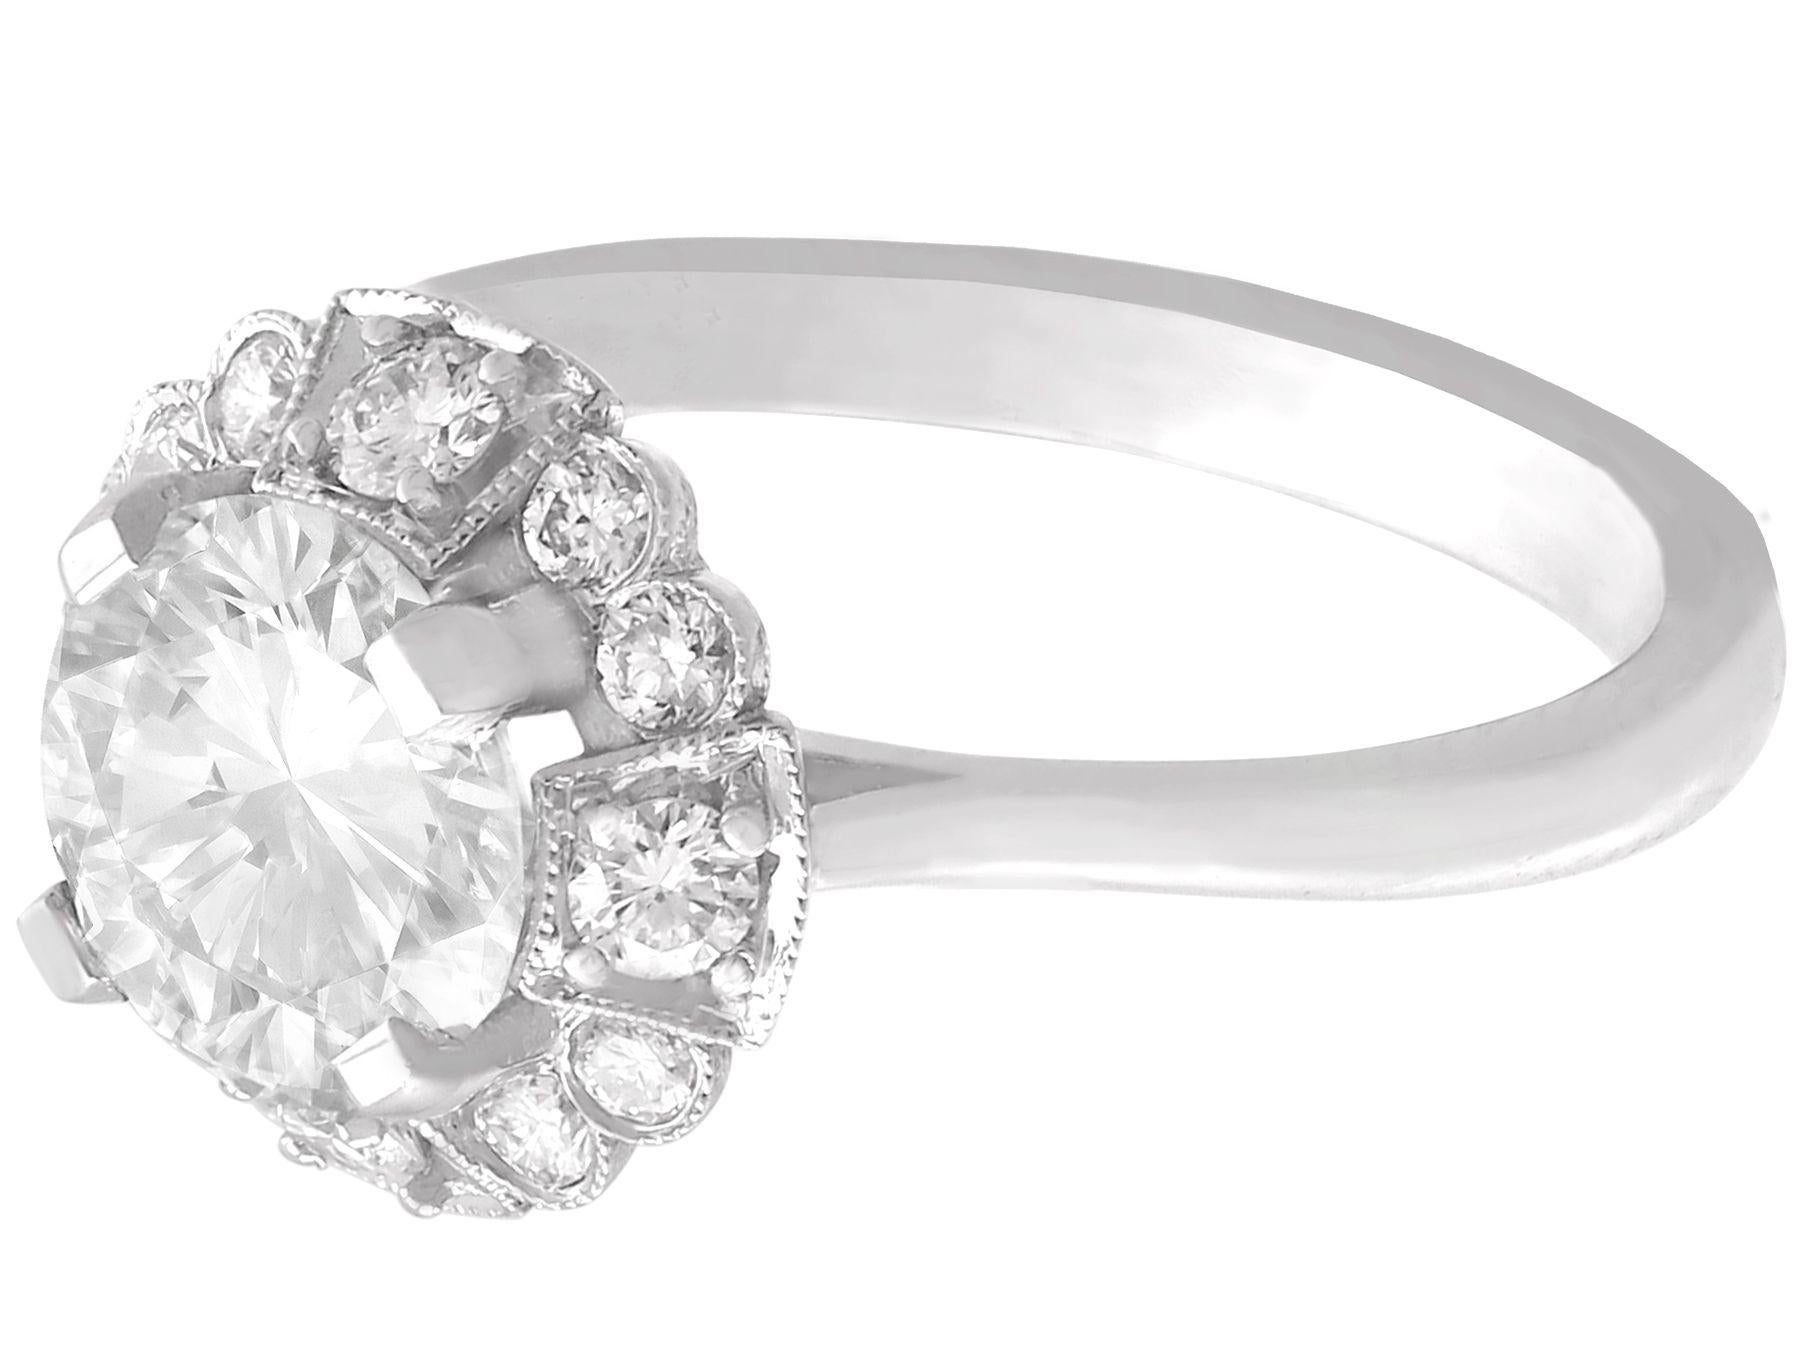 Taille ronde 1950s Vintage 1.83 Carat Diamond and White Gold Cluster Engagement Ring en vente